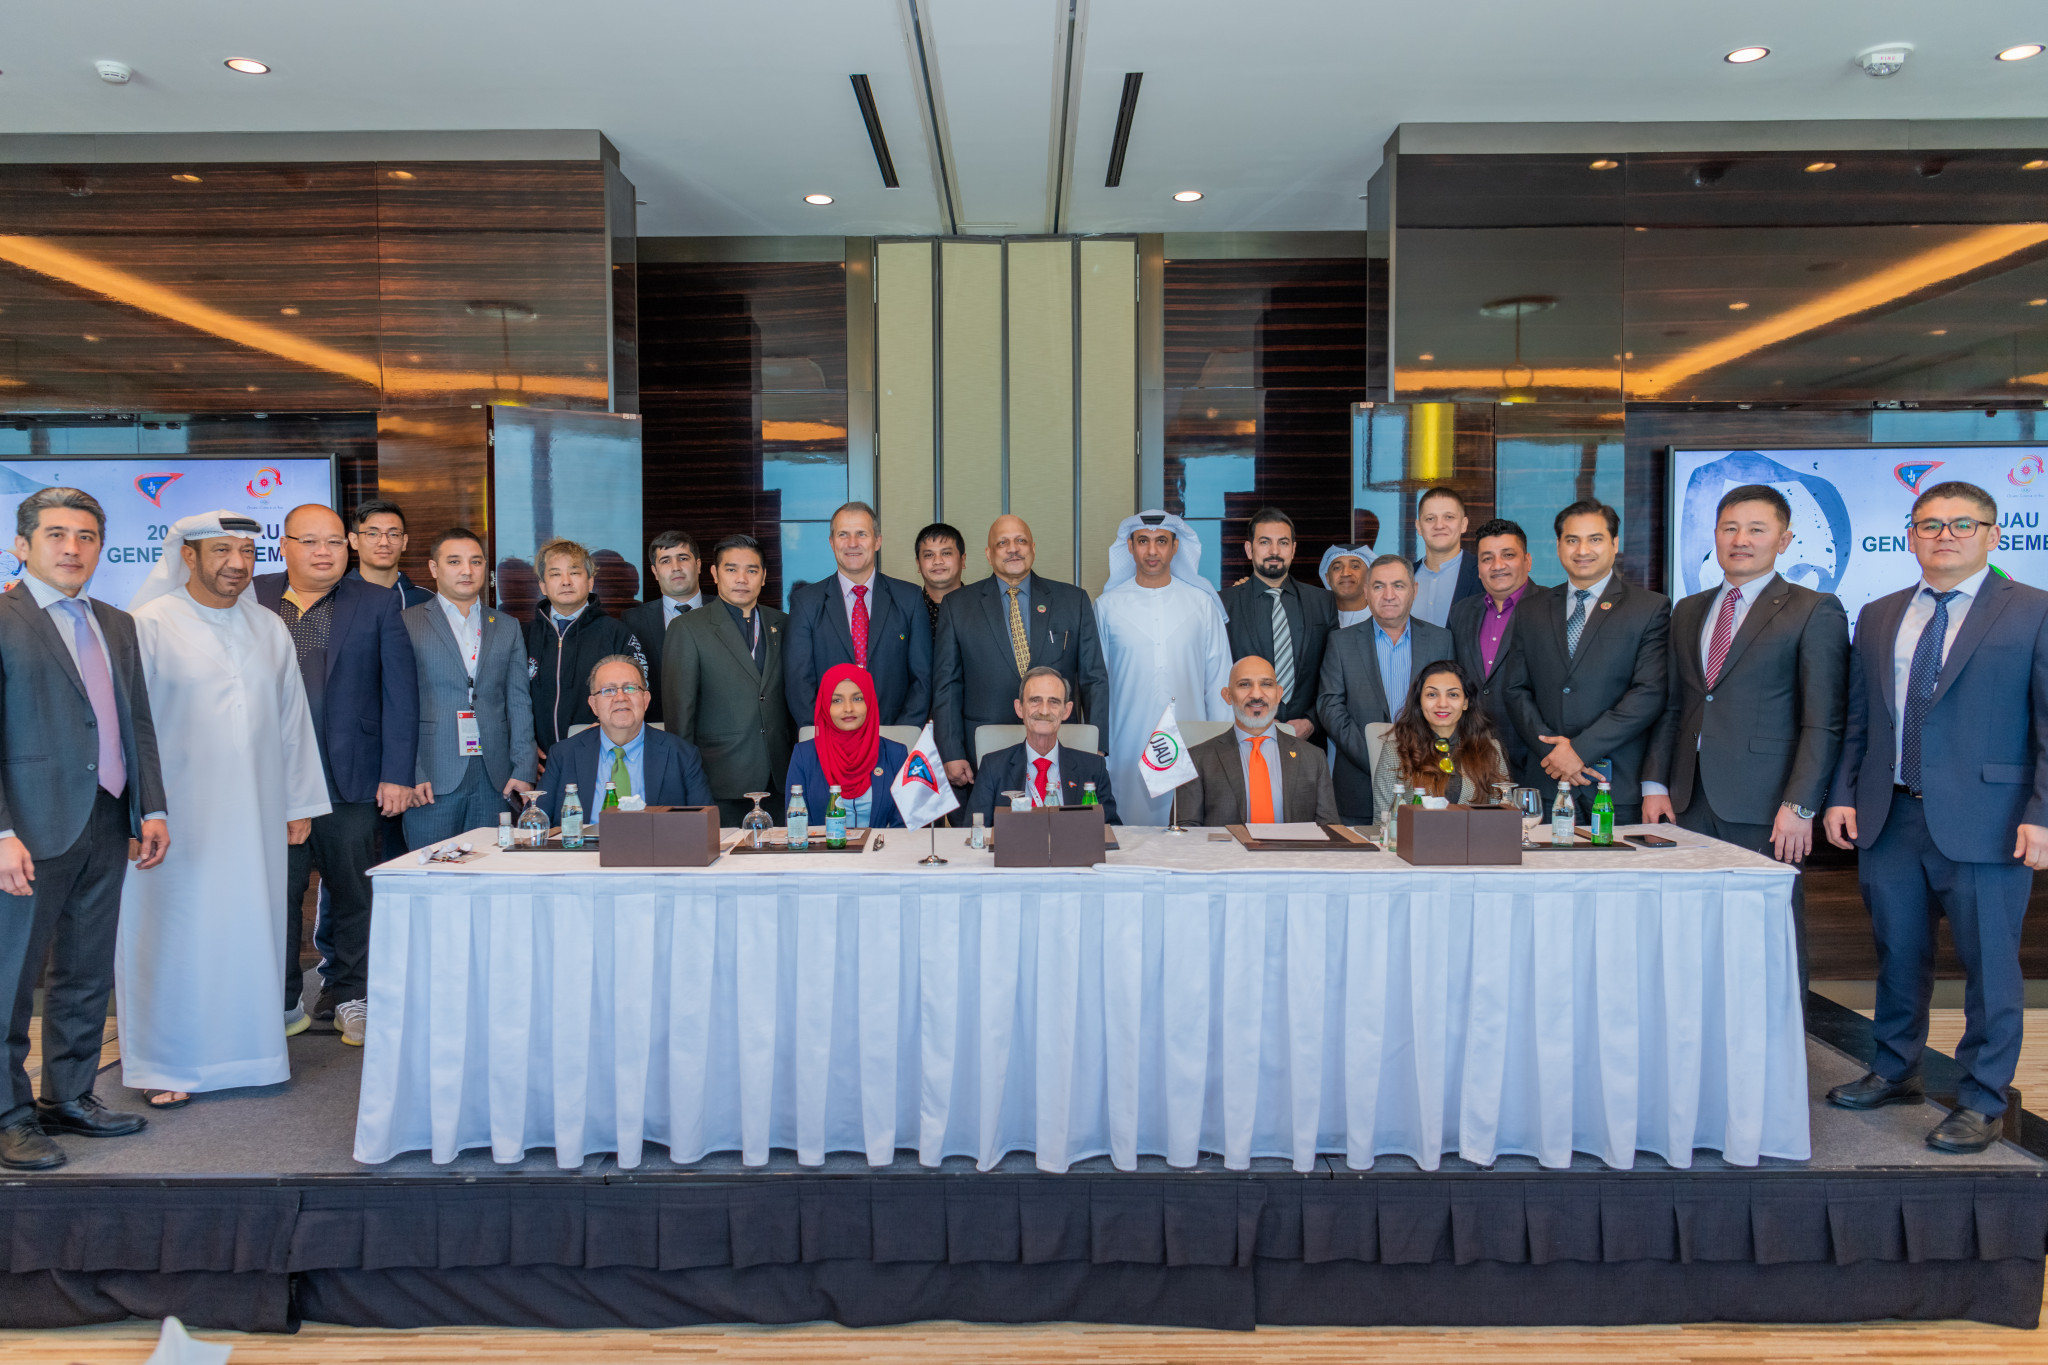 The JJAU General Assembly took place today in Manama ©JJAU